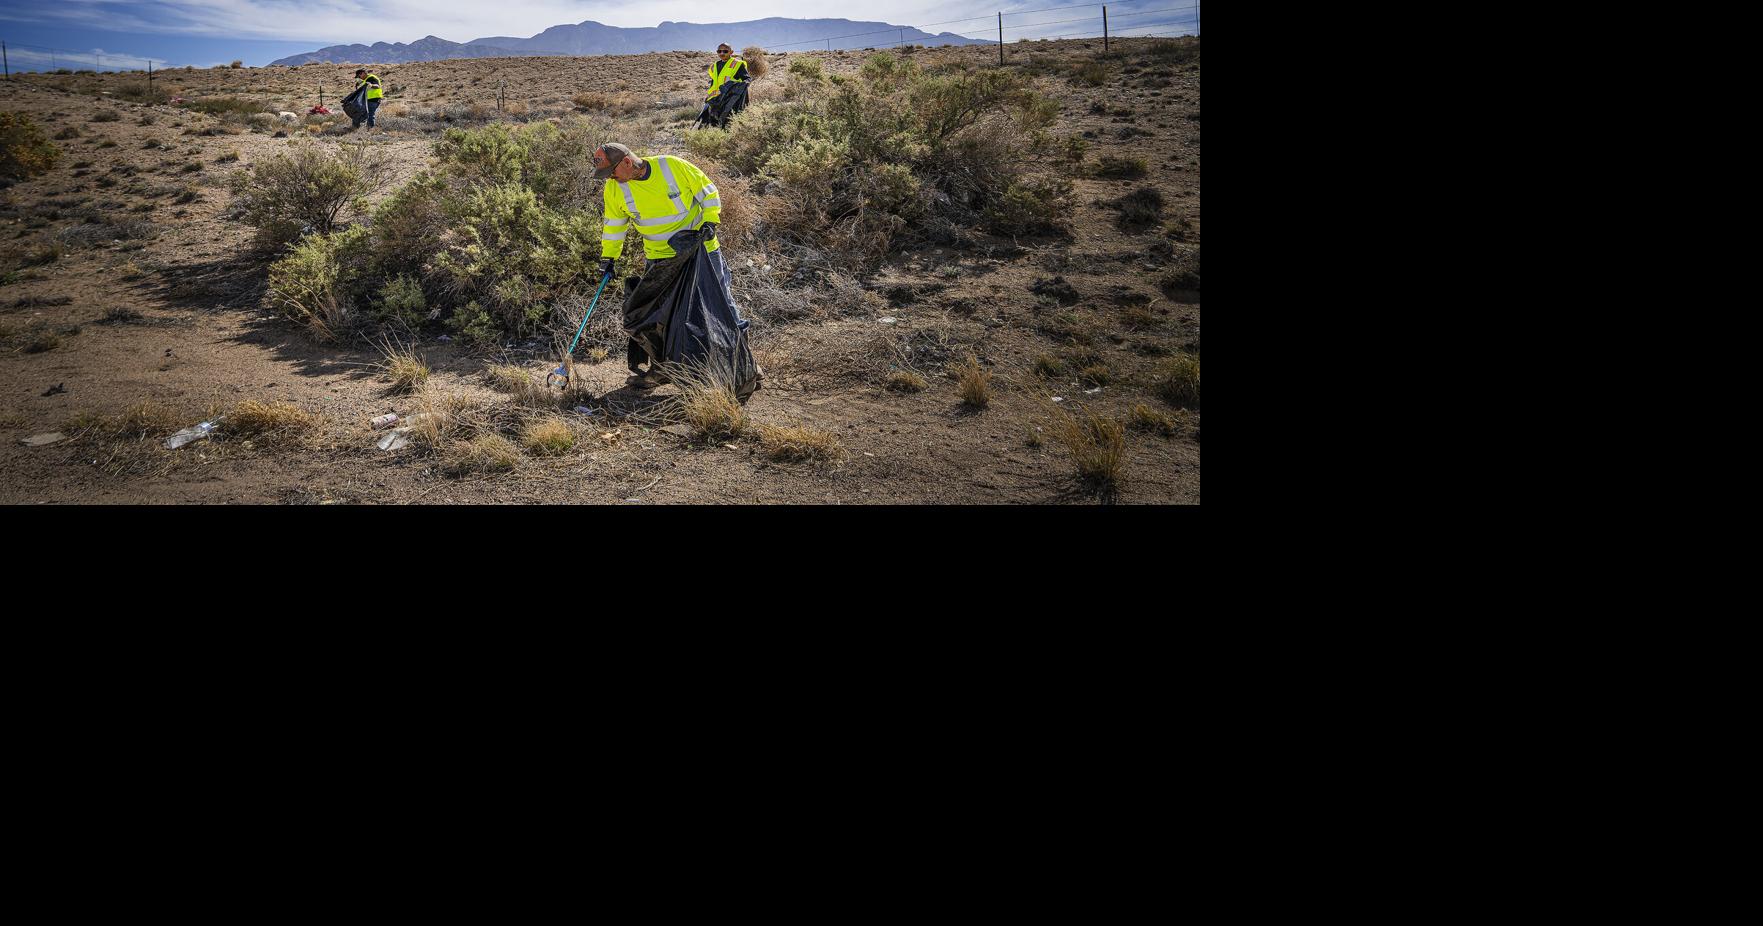 Earth Day cleanup starts early in New Mexico